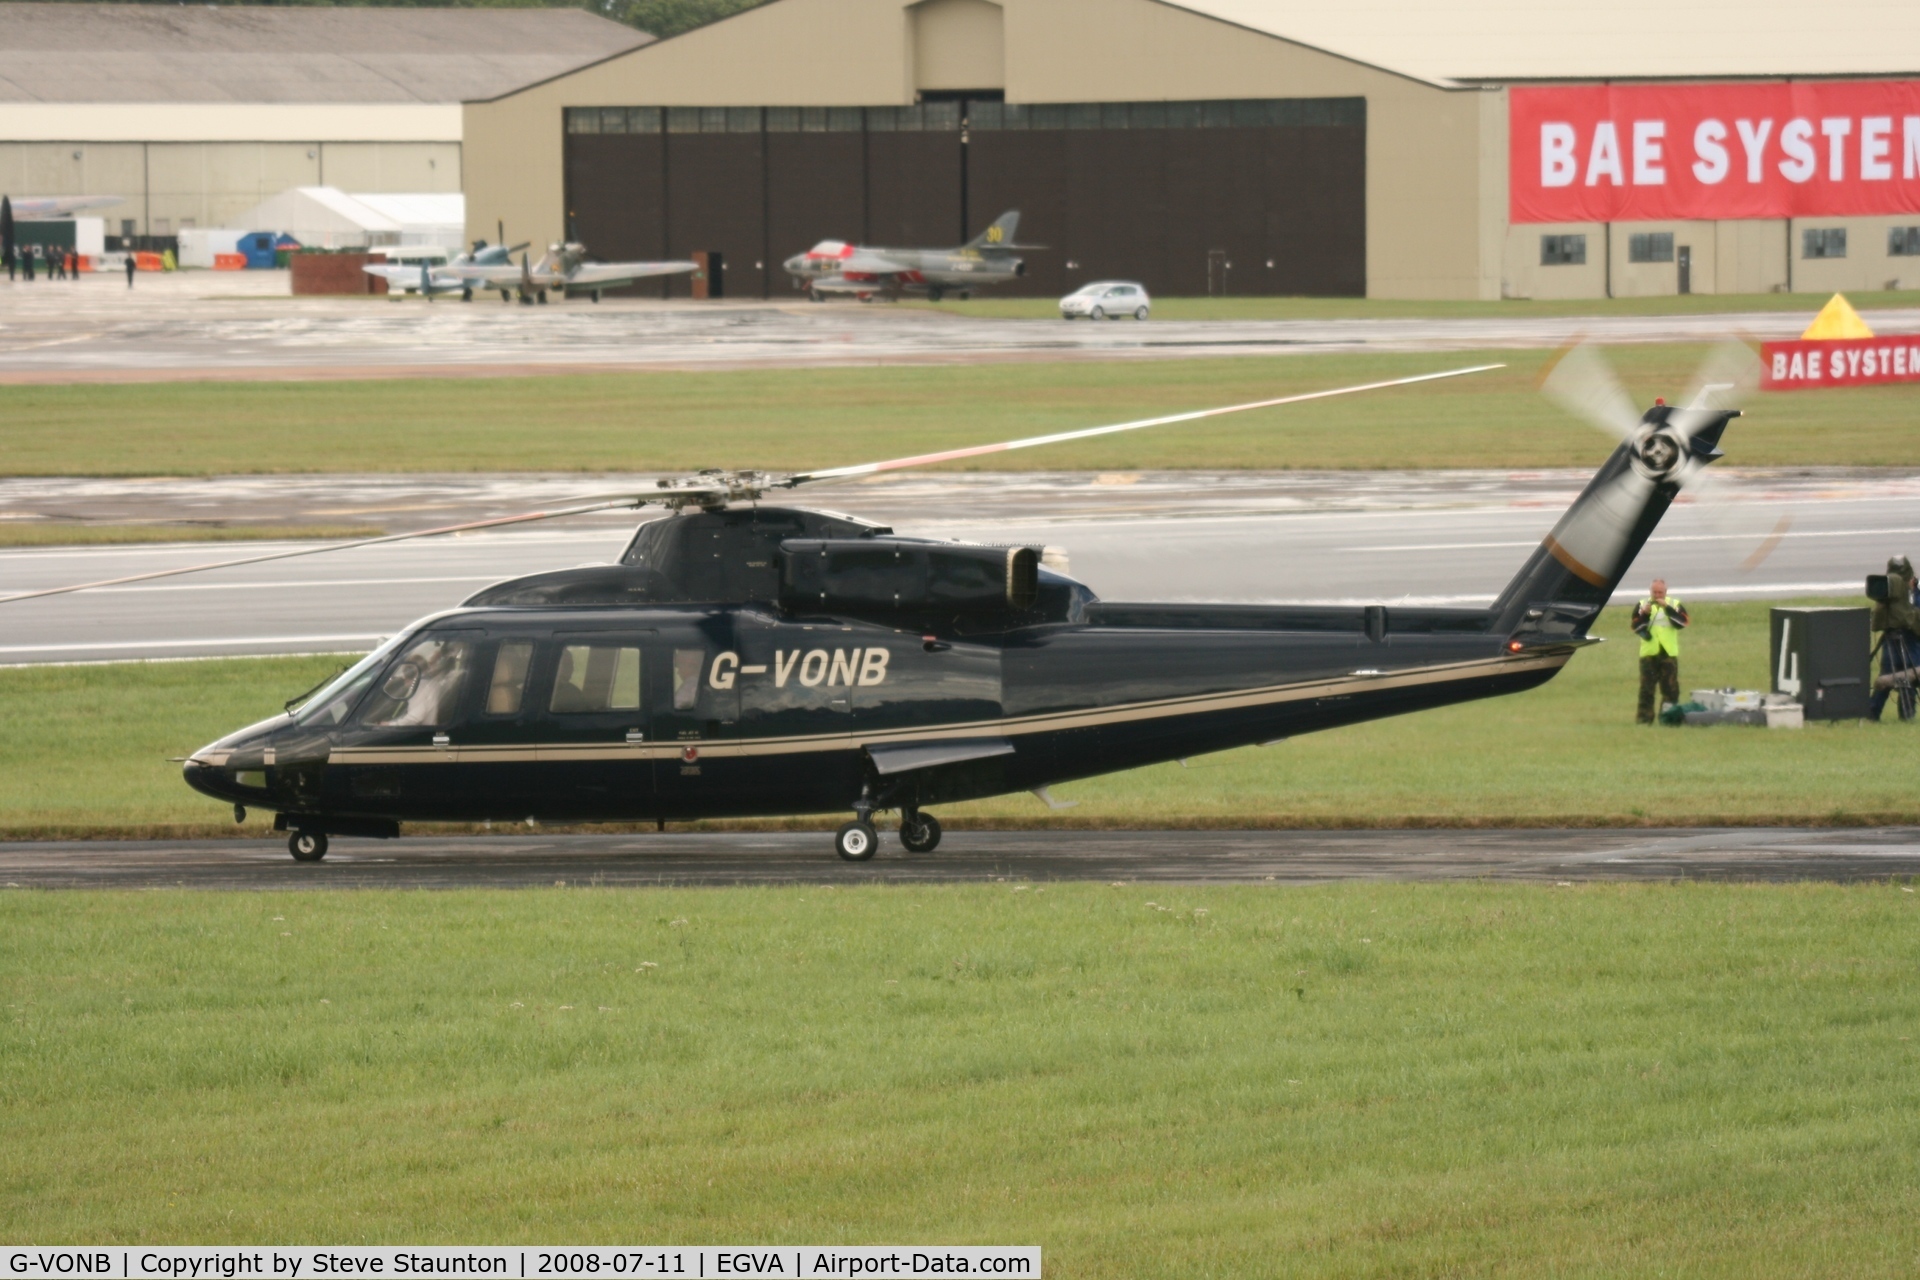 G-VONB, 1992 Sikorsky S-76B C/N 760399, Taken at the Royal International Air Tattoo 2008 during arrivals and departures (show days cancelled due to bad weather)